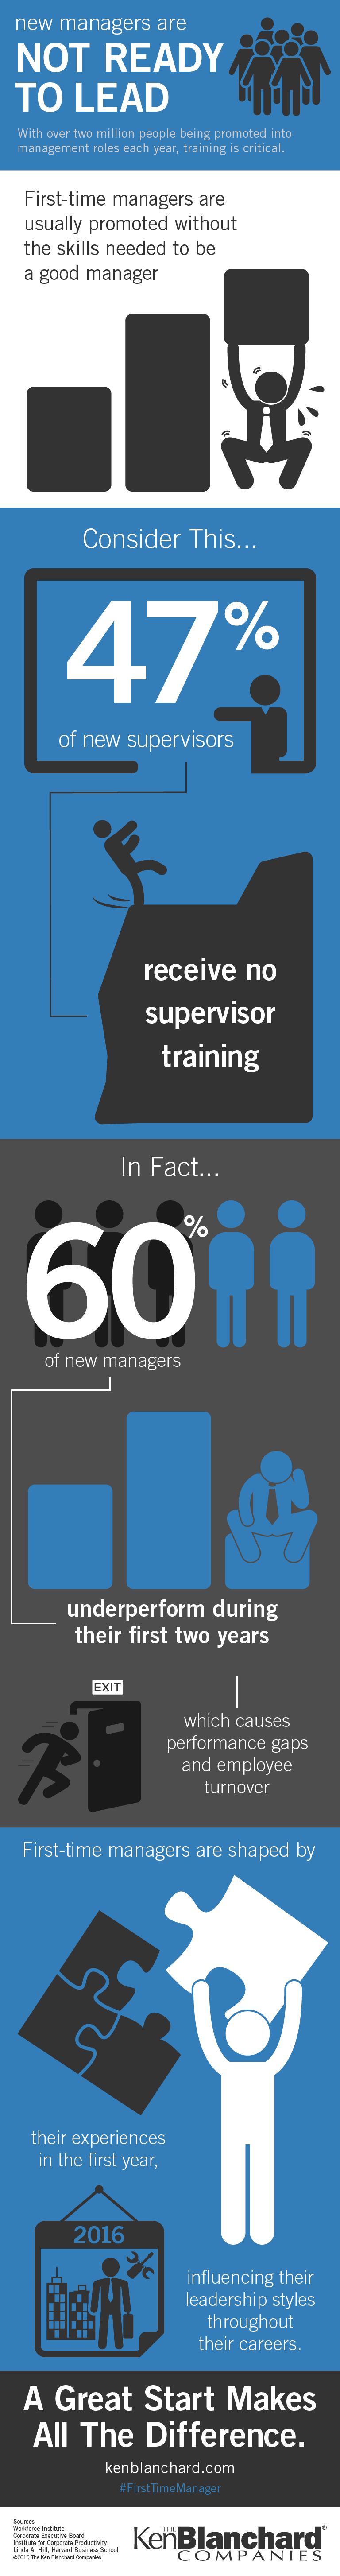 NewManagersNotReady_Infographic